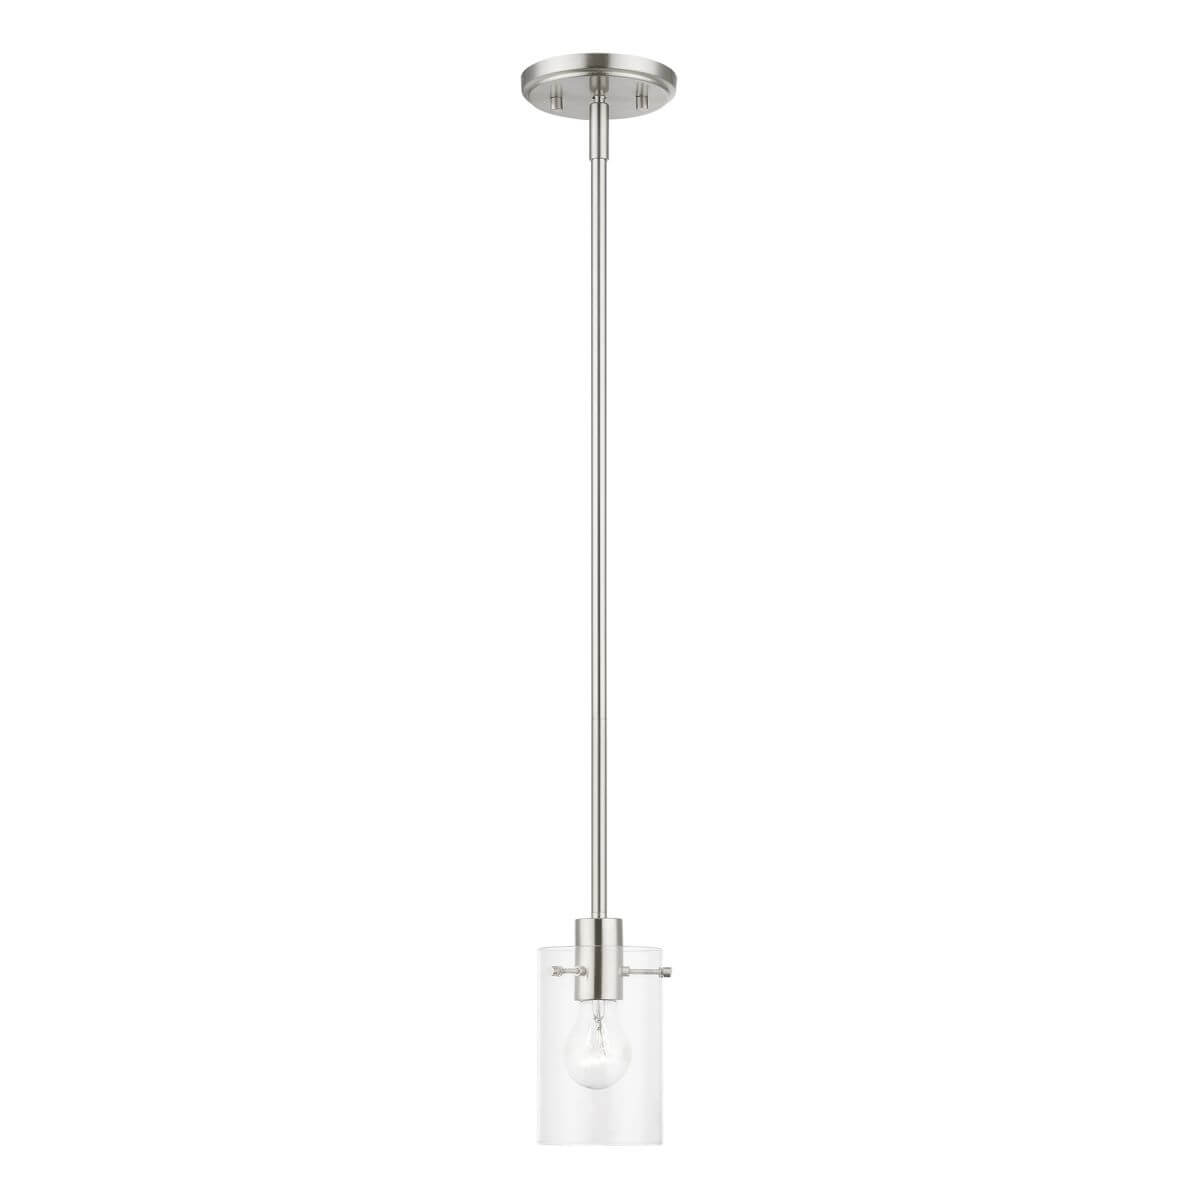 Livex 46151-91 Munich 1 Light 5 inch Pendant in Brushed Nickel with Clear Glass